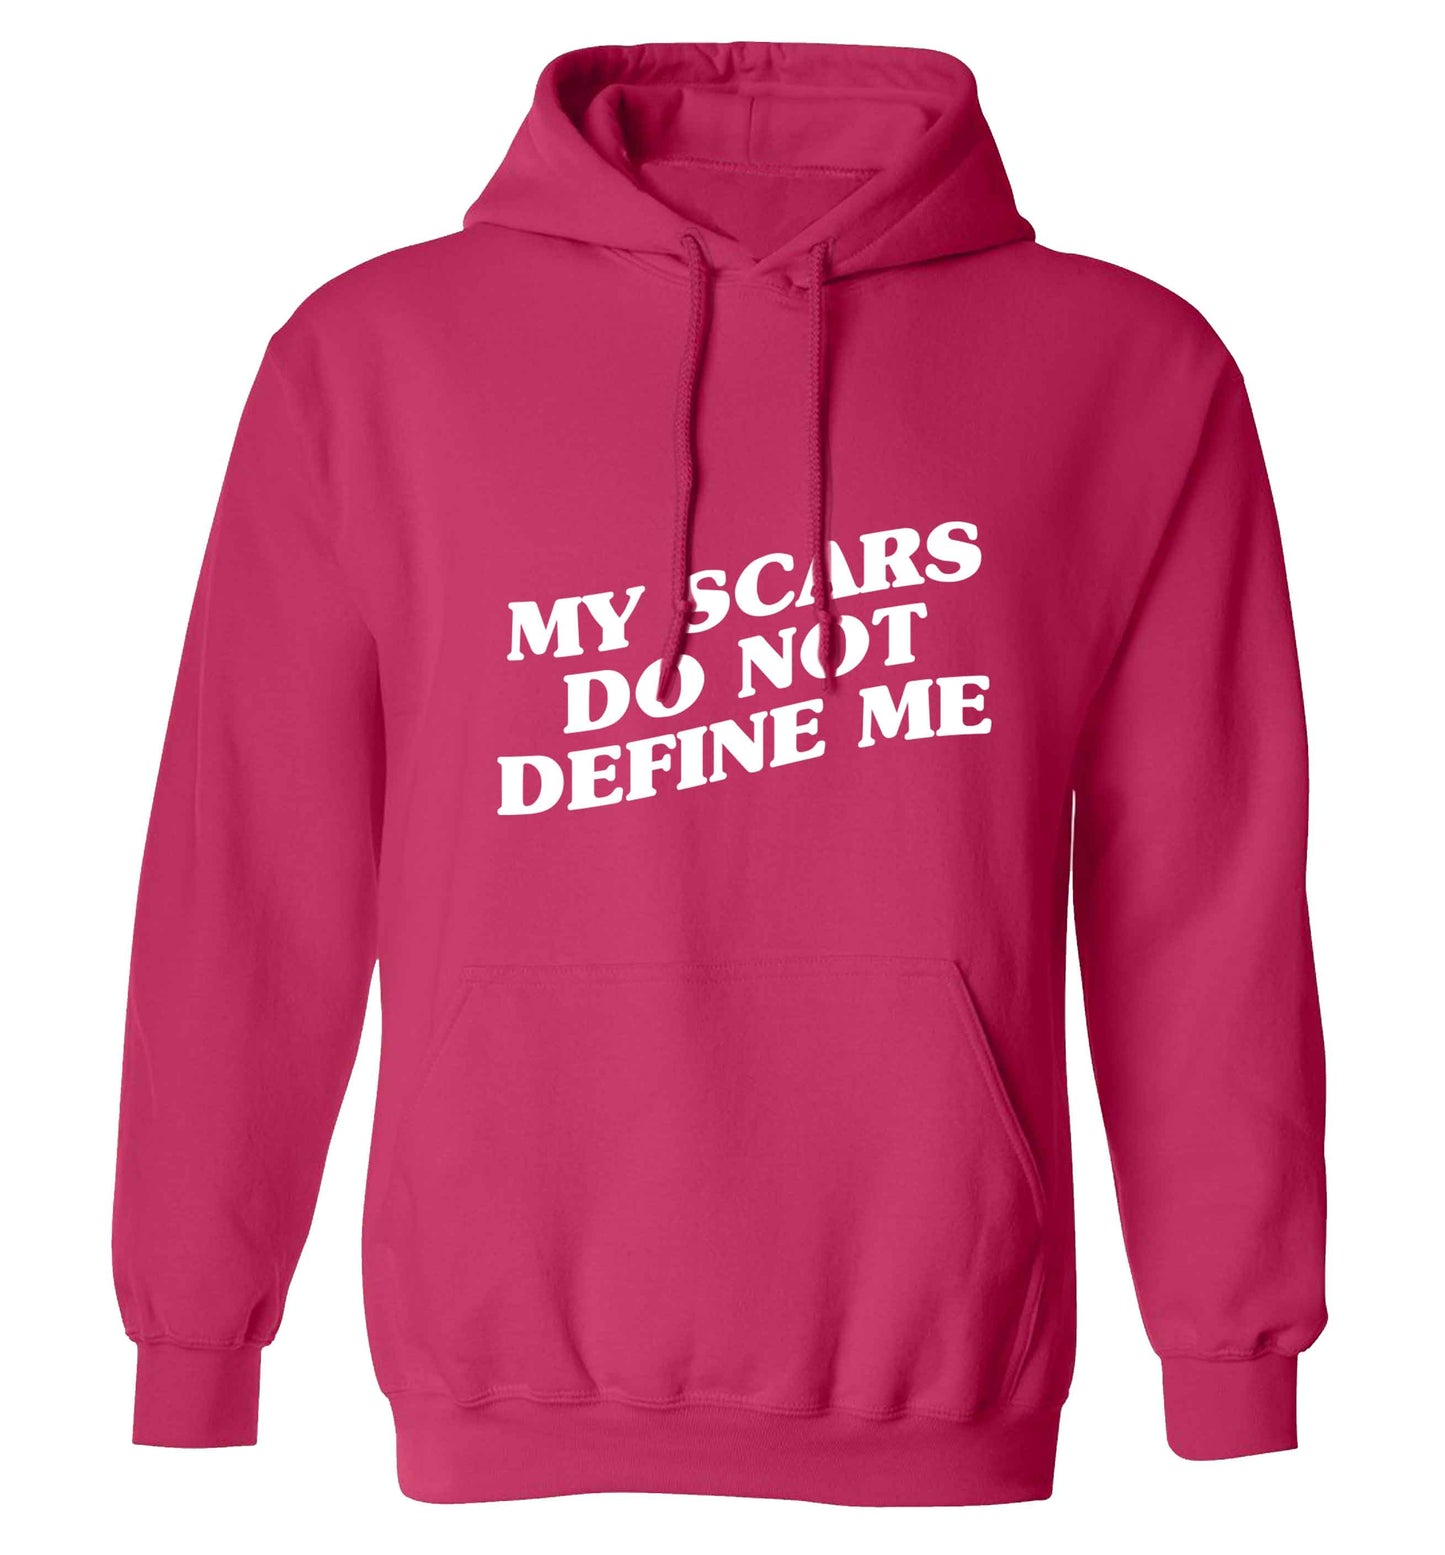 My scars do not define me adults unisex pink hoodie 2XL